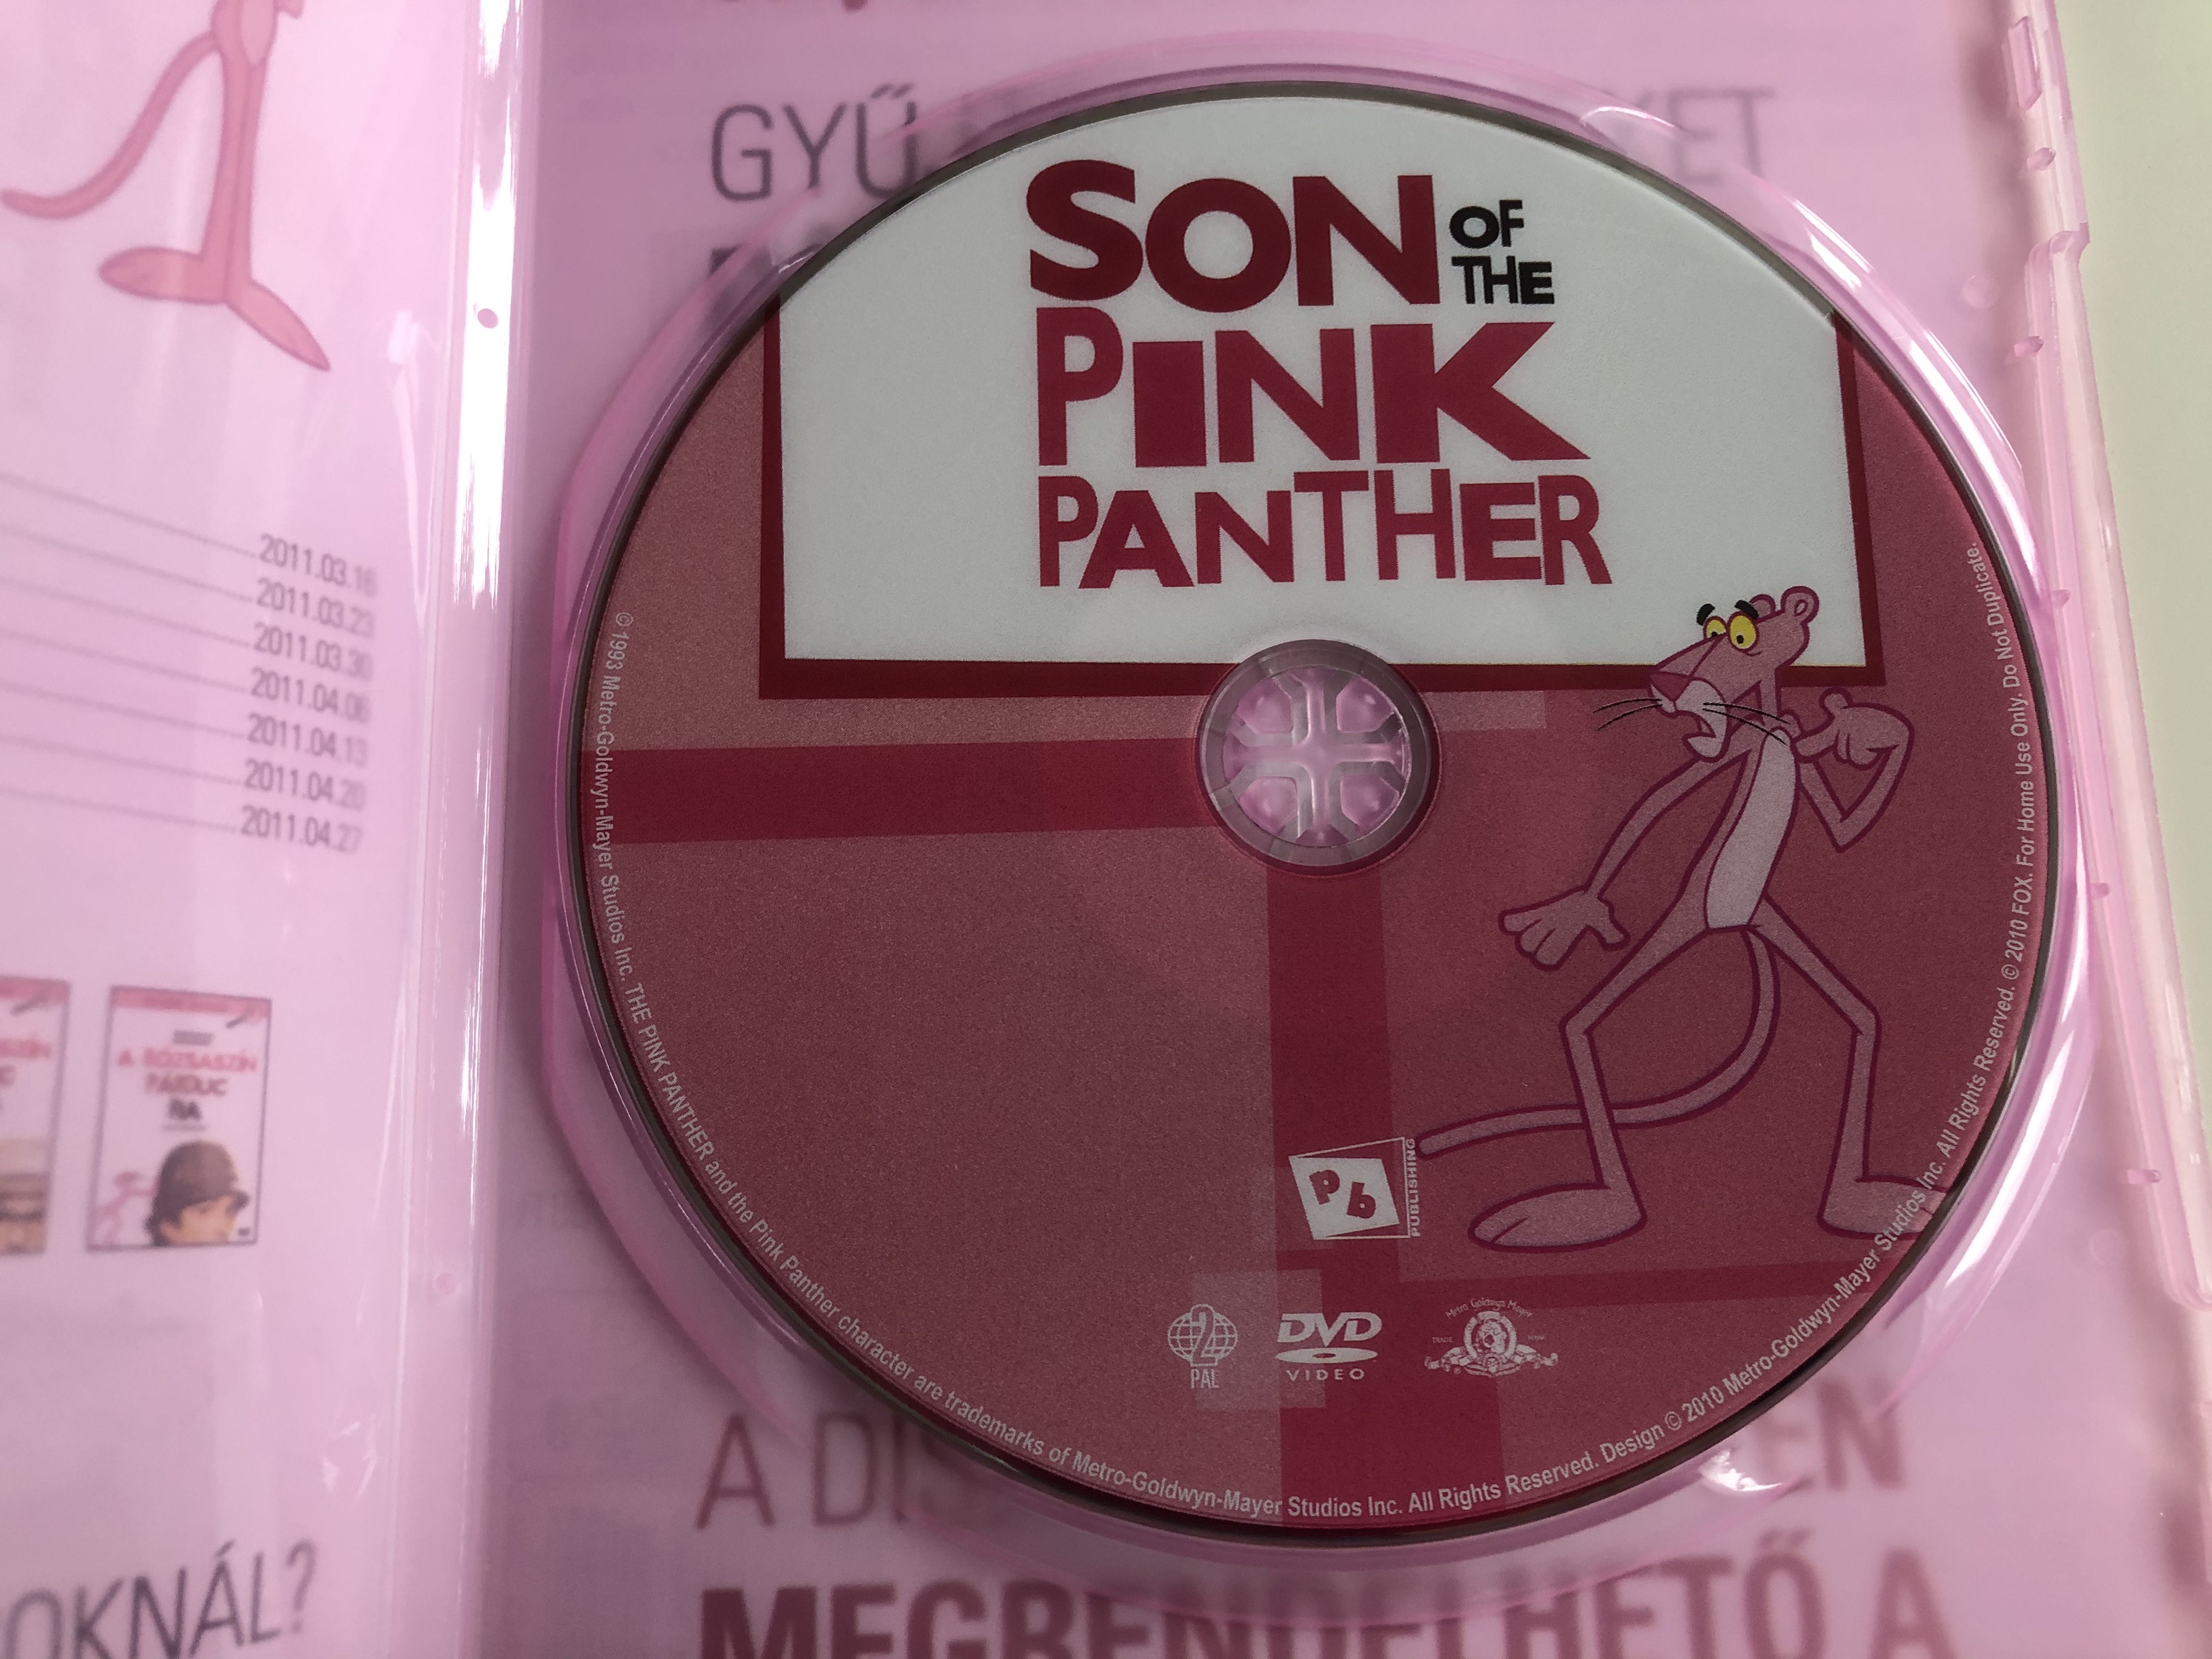 son-of-the-pink-panther-dvd-1993-a-r-zsasz-n-p-rduc-fia-2.jpg